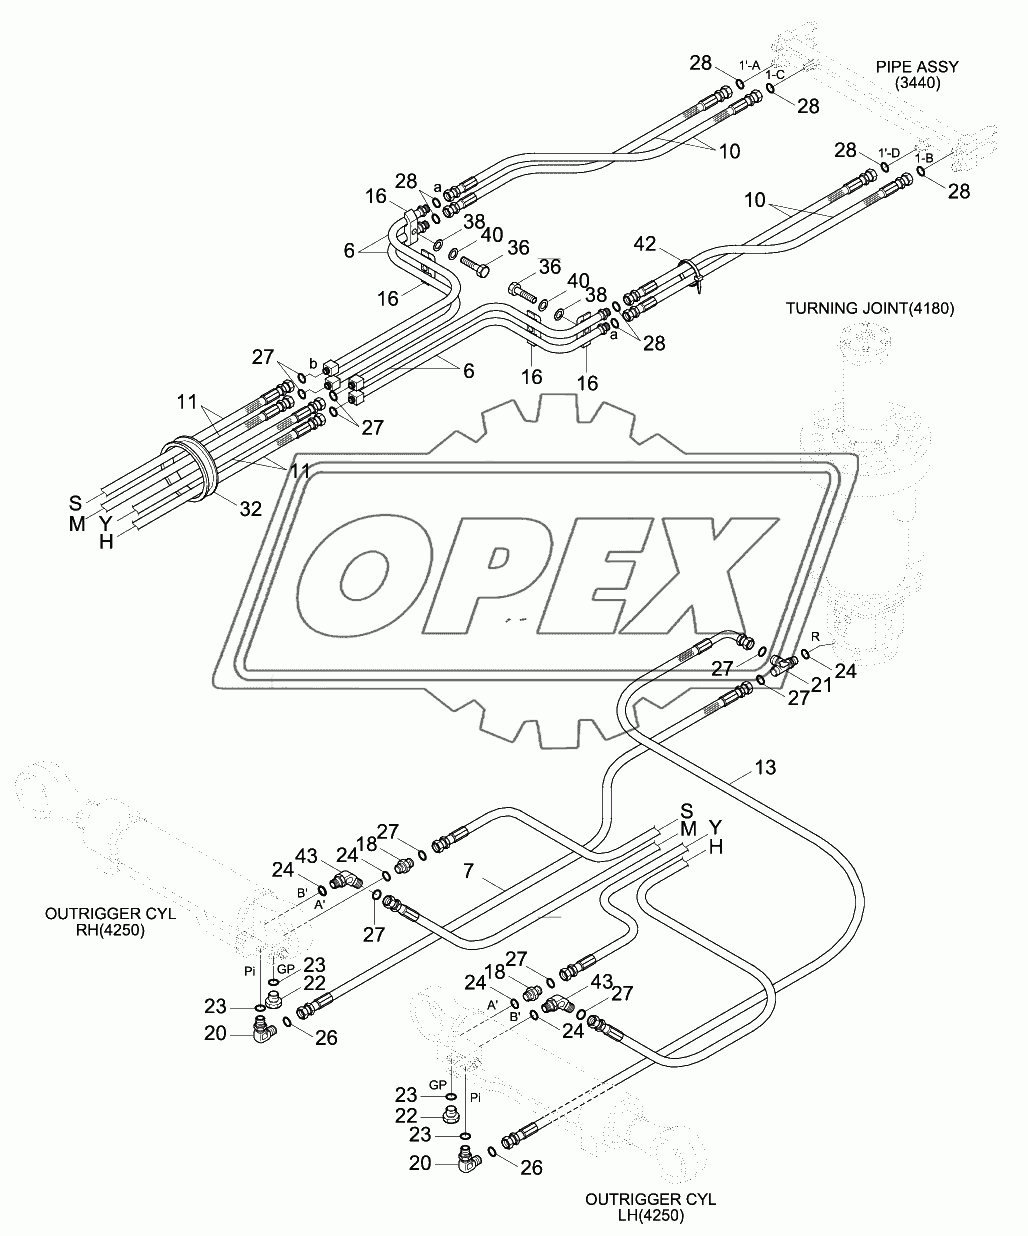 LOWER HYD PIPING 2(F/OUT, R/BLD,-#0014)